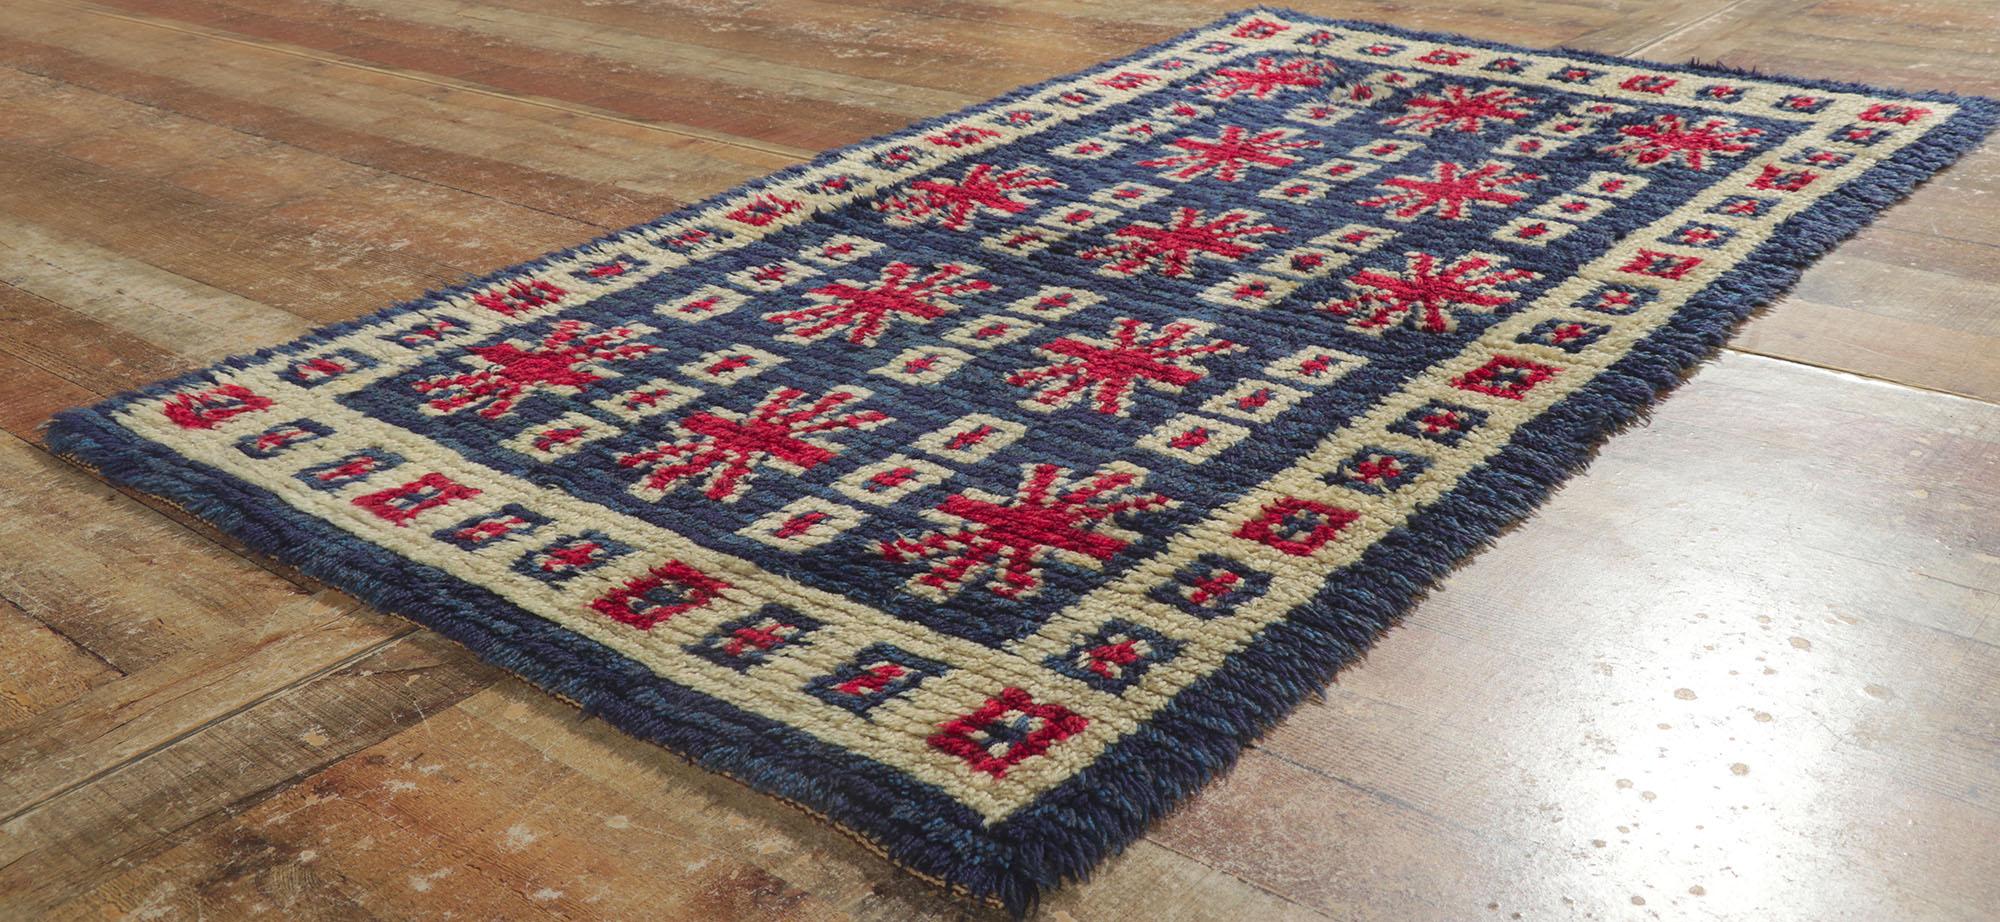 Scandinavian Modern Vintage Finnish Rya Ryijy Rug with Union Jack Motifs and Cool Britannia Style For Sale